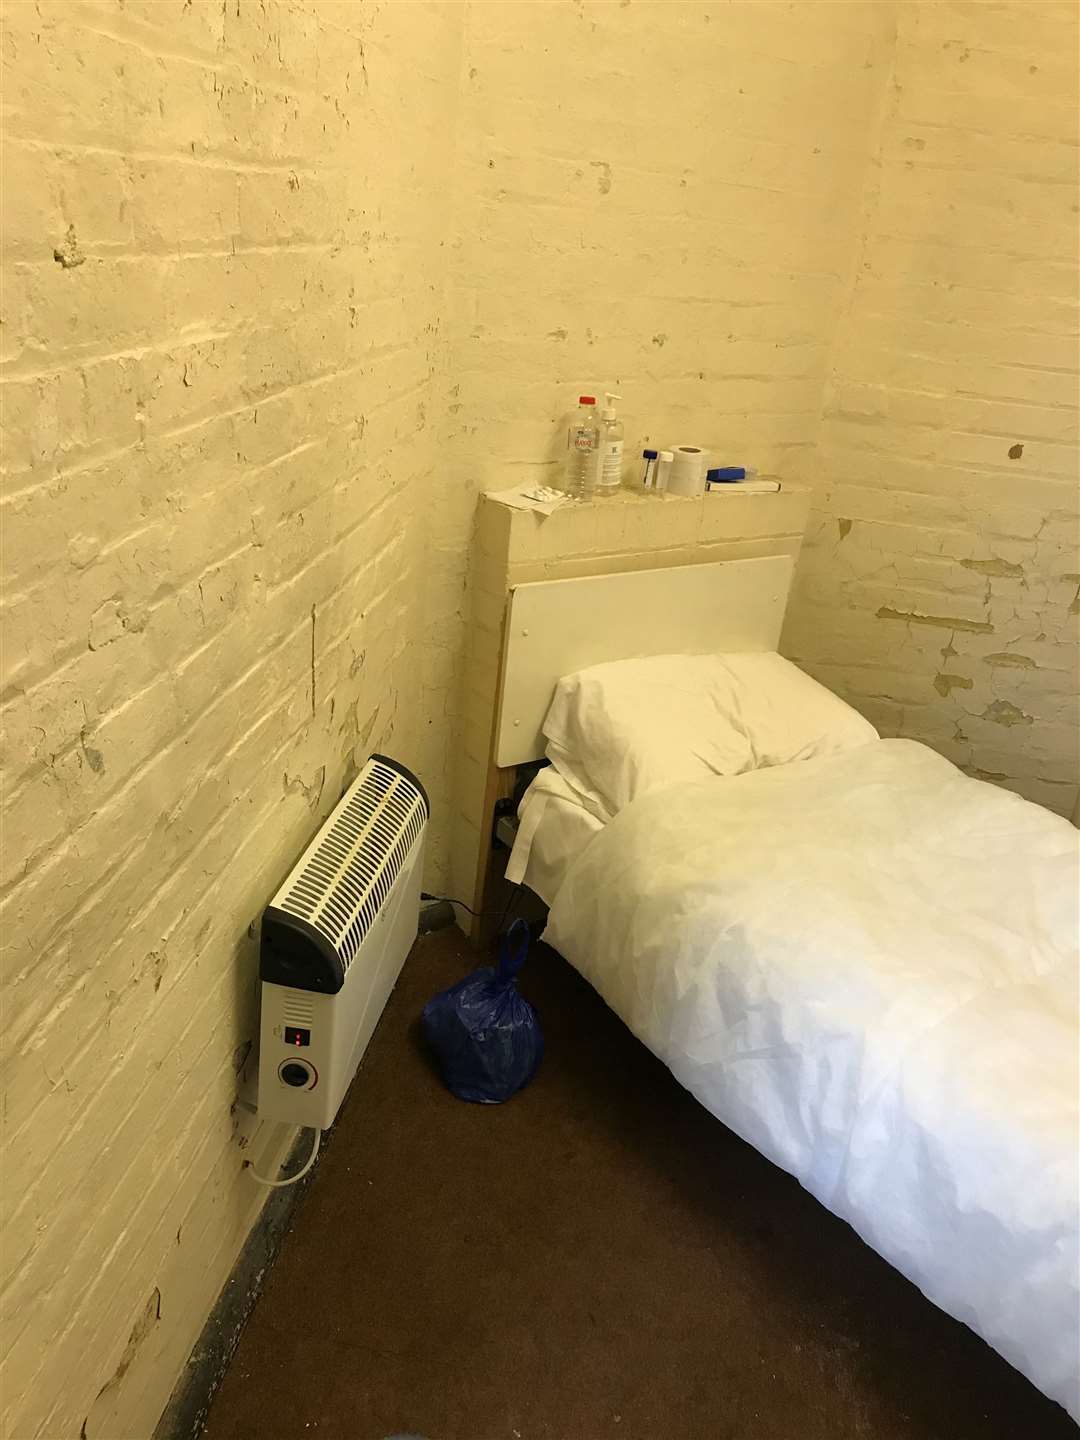 Those at risk of self-harm were put in an isolation block “unfit for habitation”. Picture: Independent Chief Inspector of Borders and Immigration